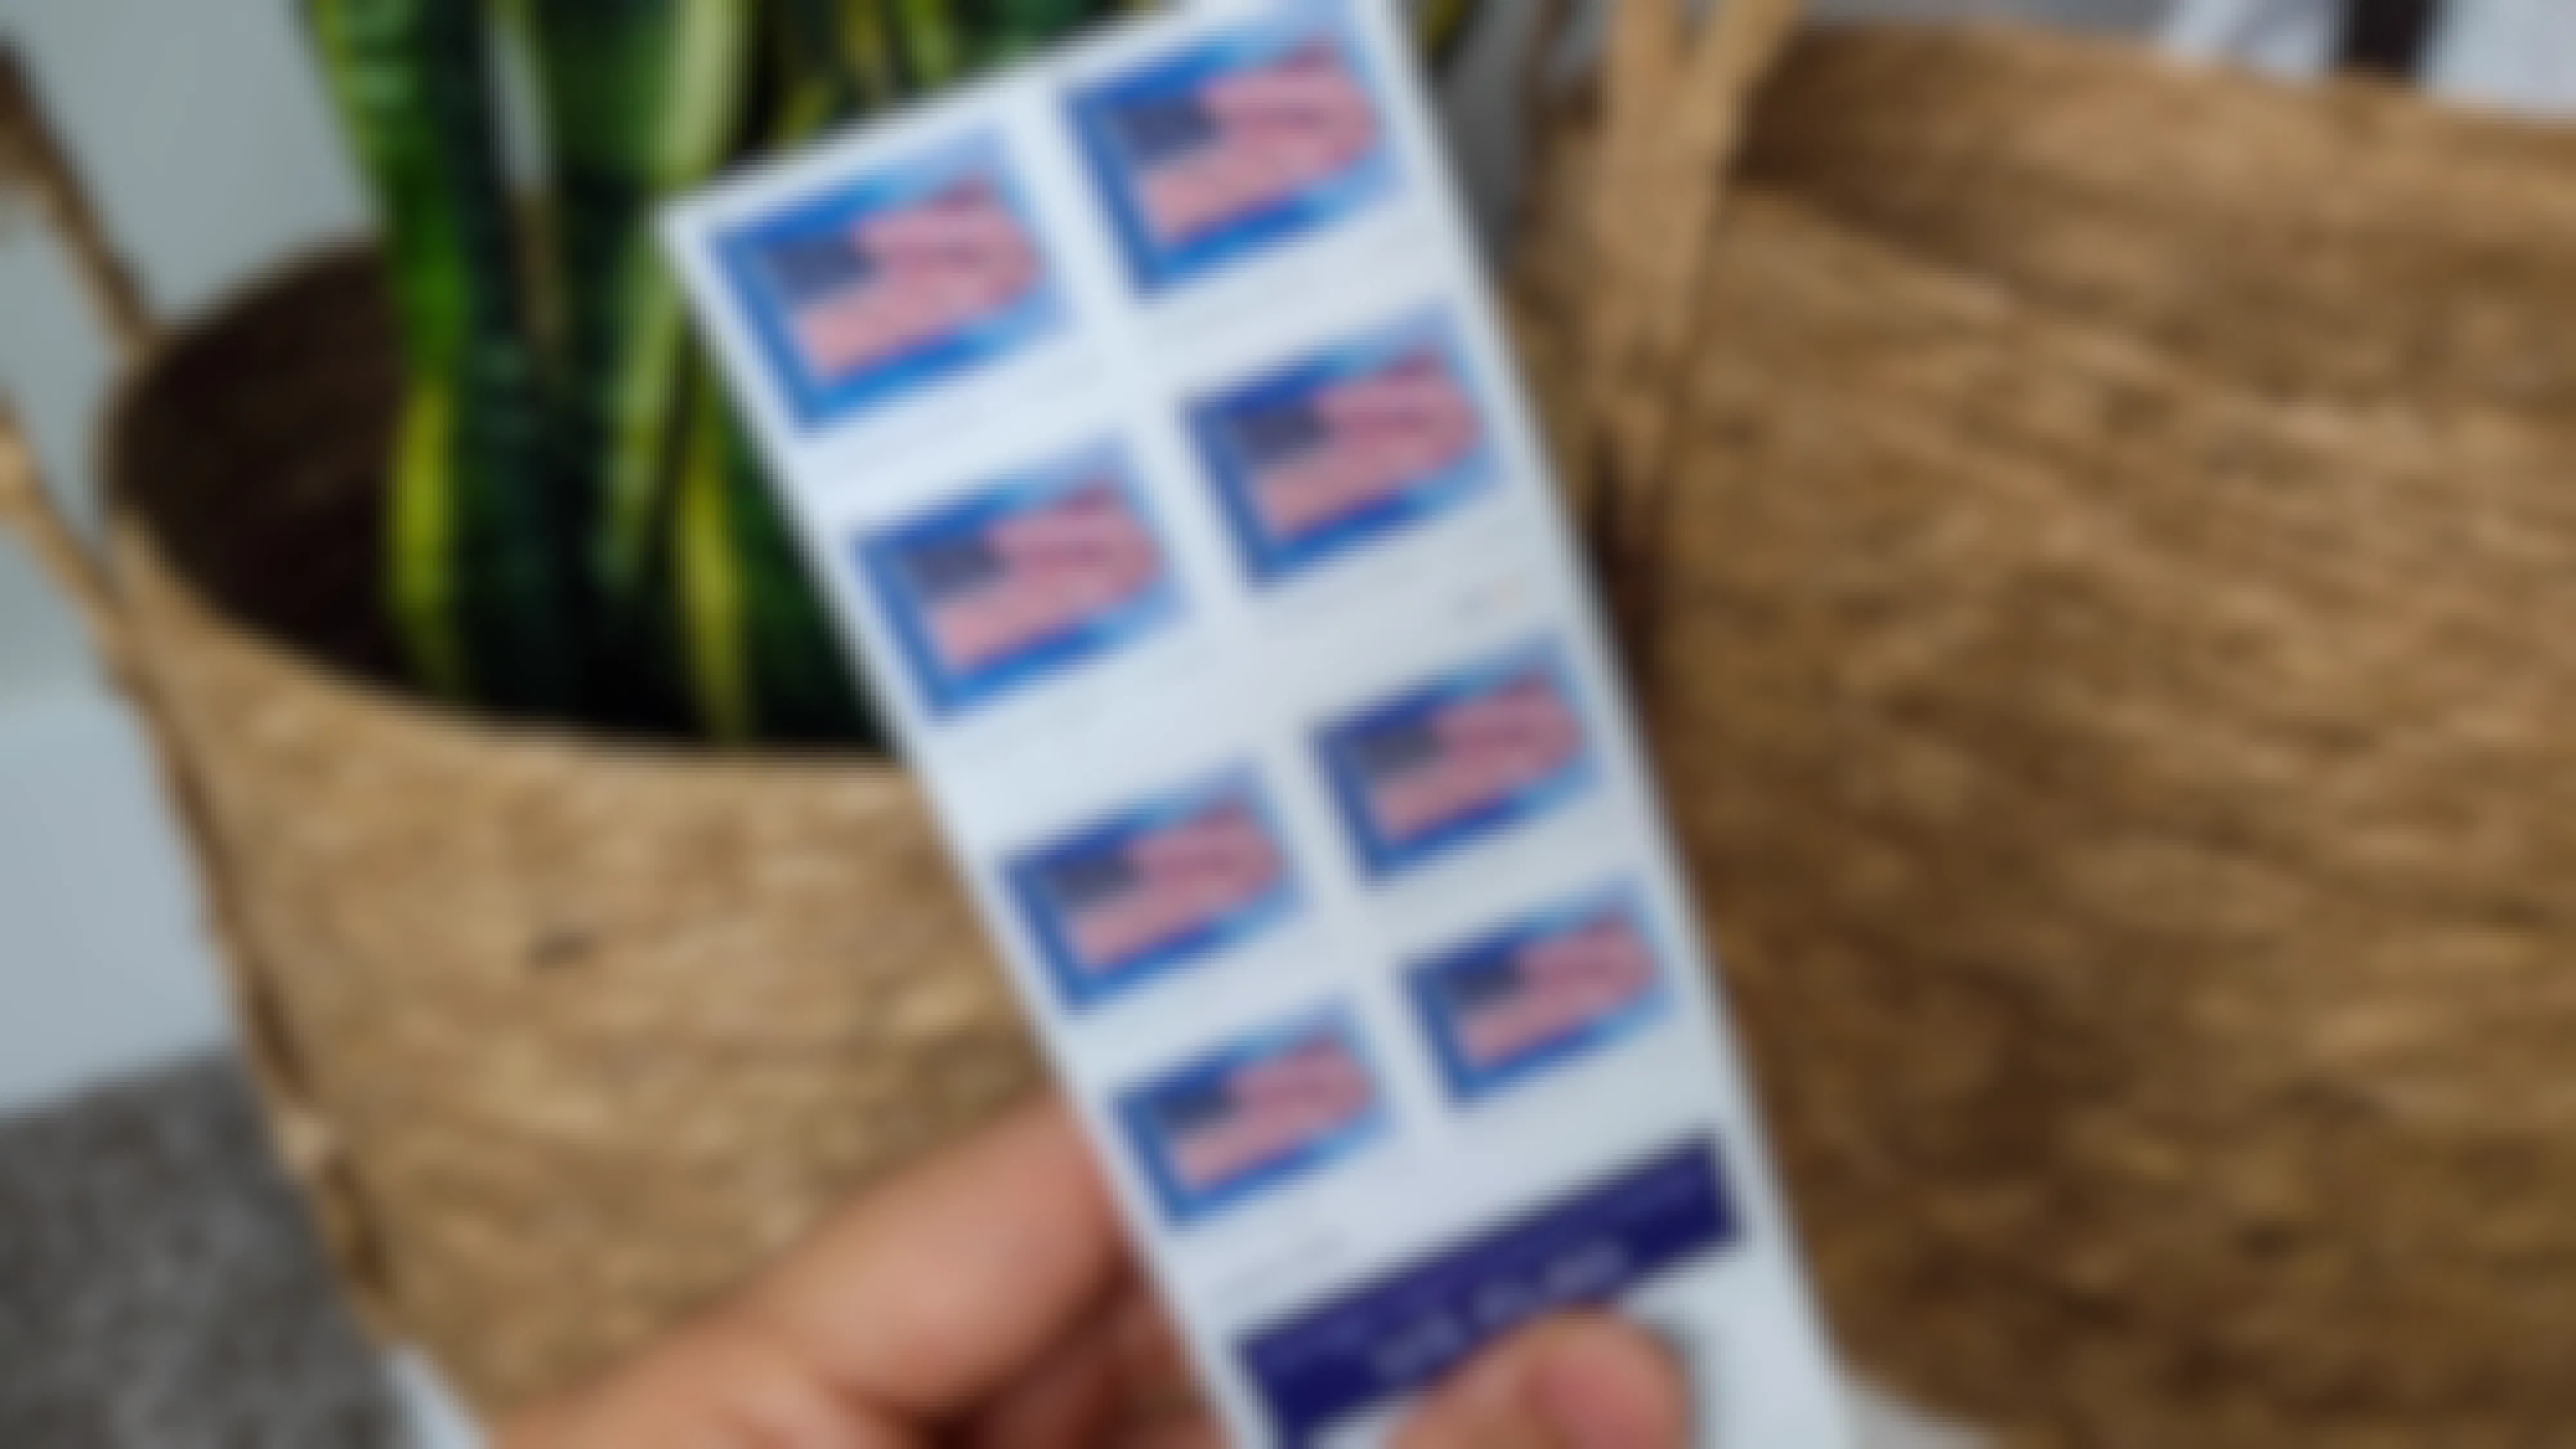 A person's hand holding some American flag Forever postage stamps.